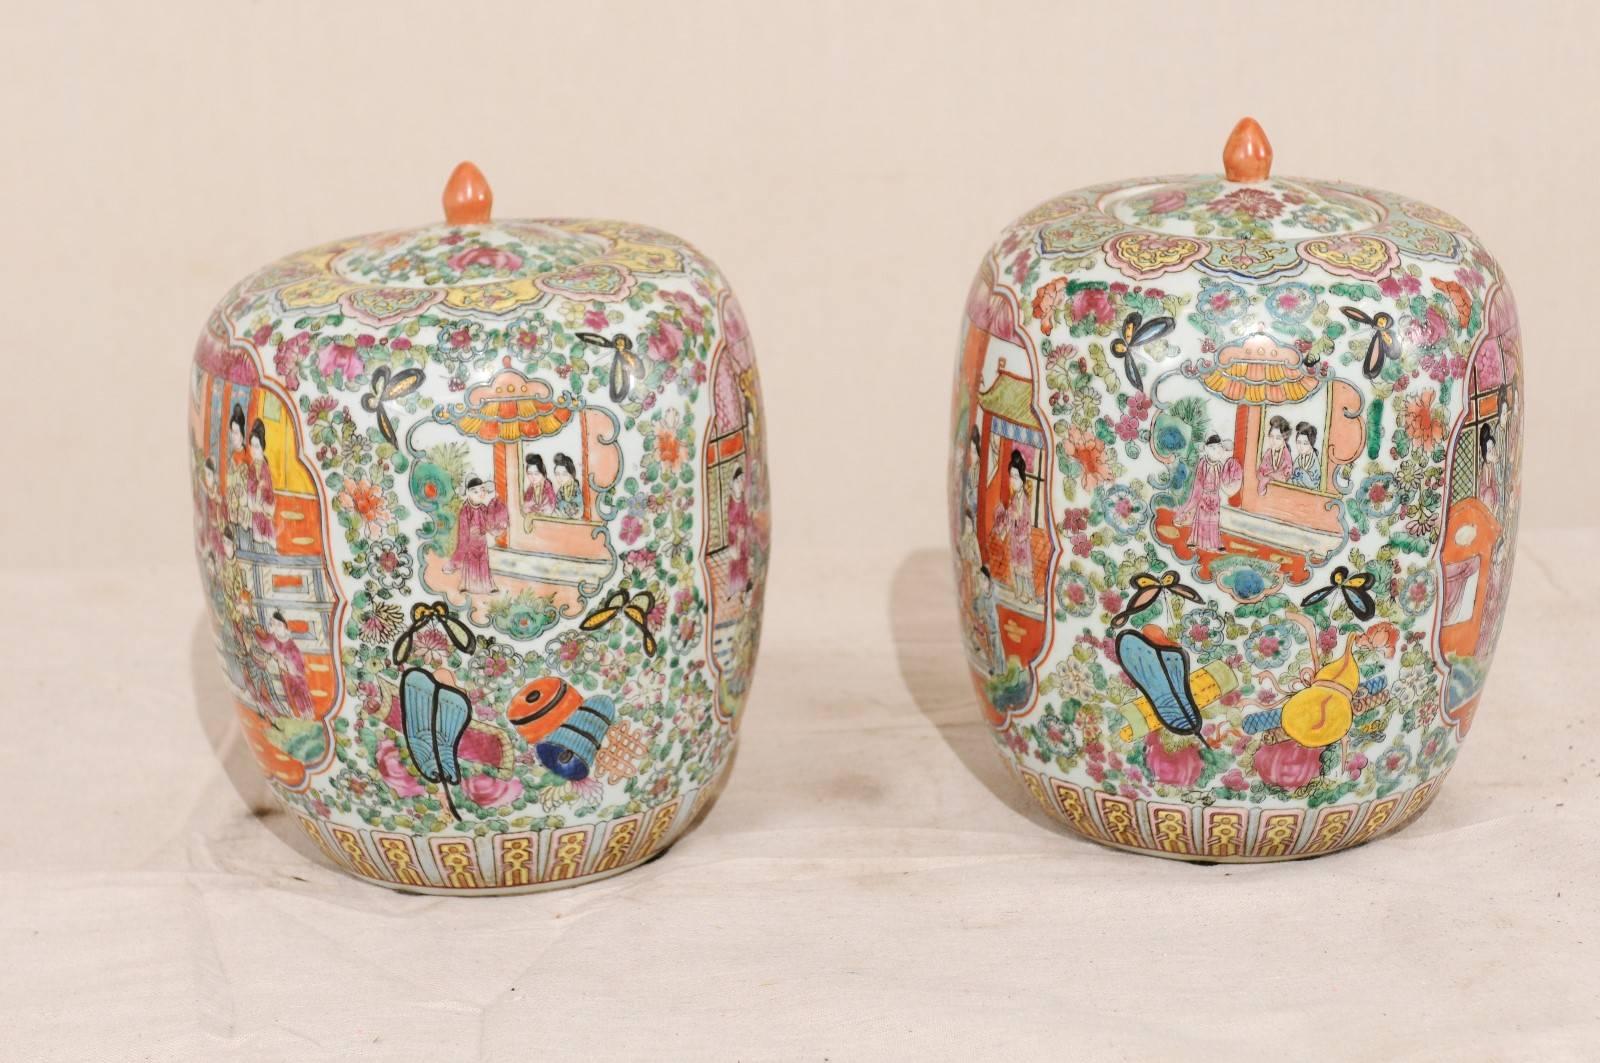 Pair of Painted Porcelain Chinese Famille Rose Jars Featuring a Palace Scene 1